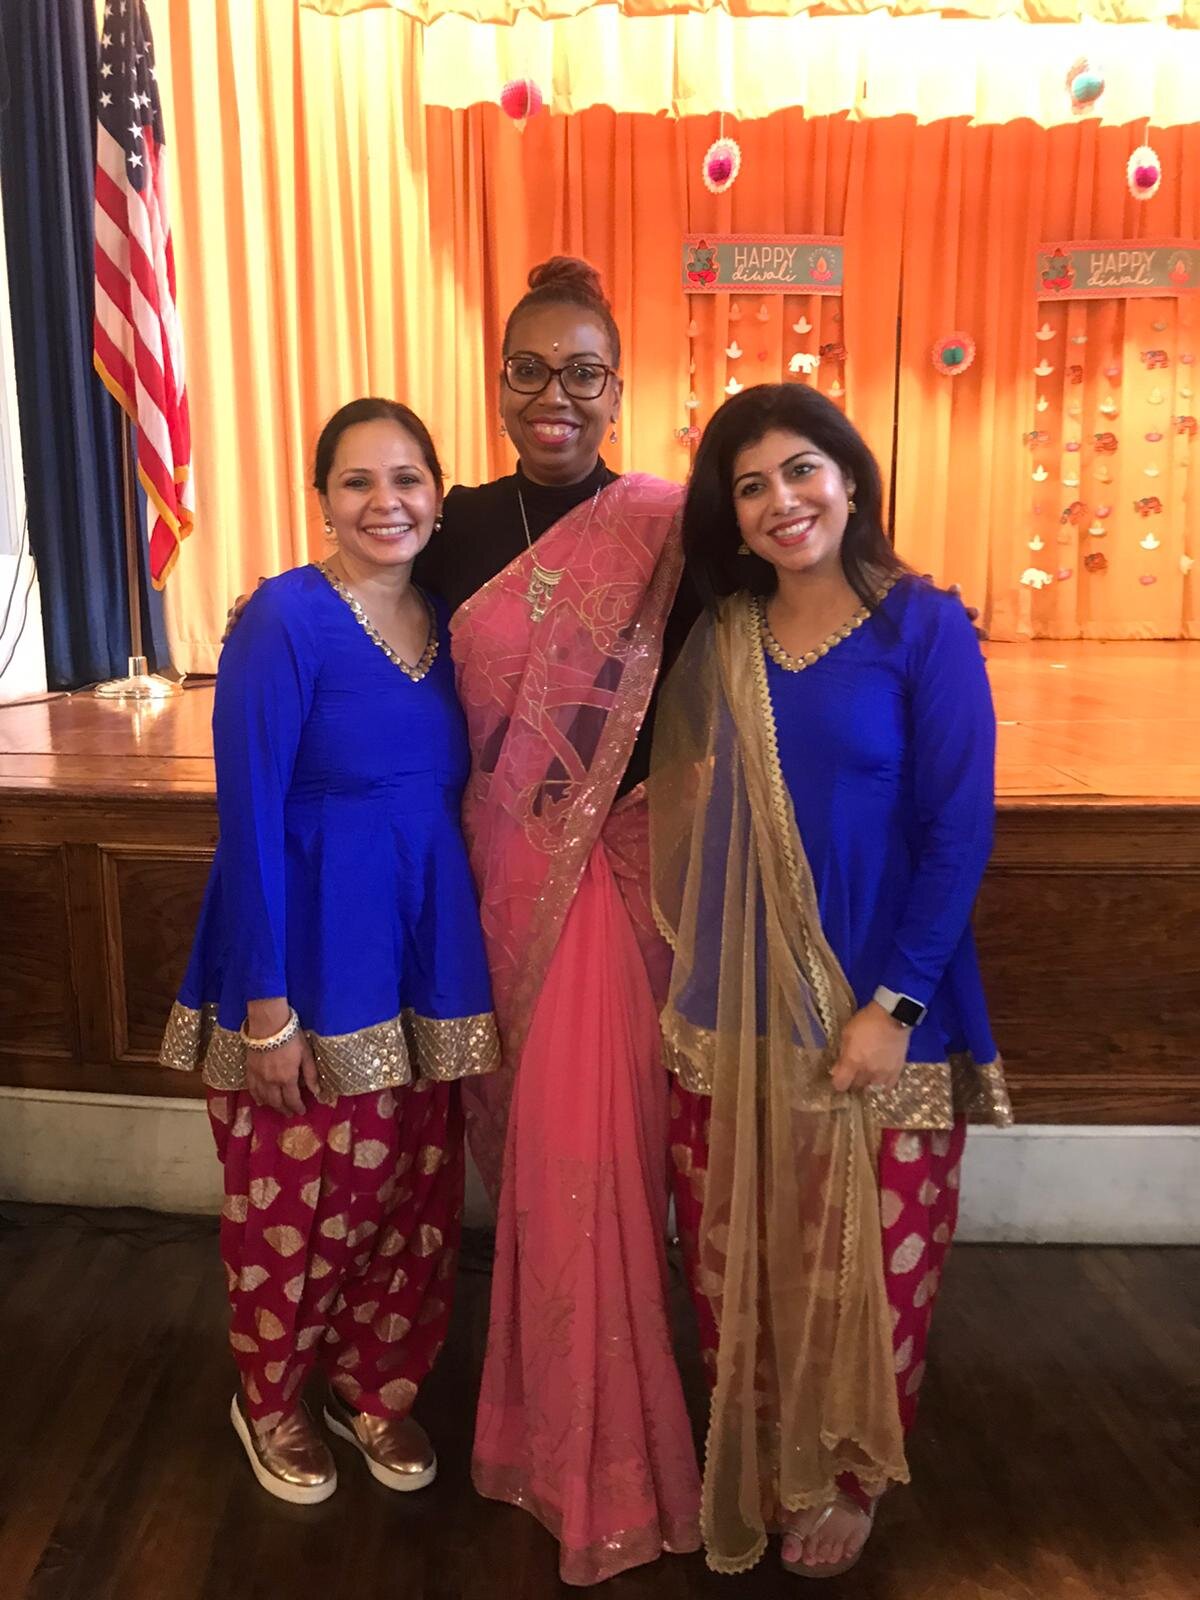 Diwali events in Jersey City - Indiansinjerseycity